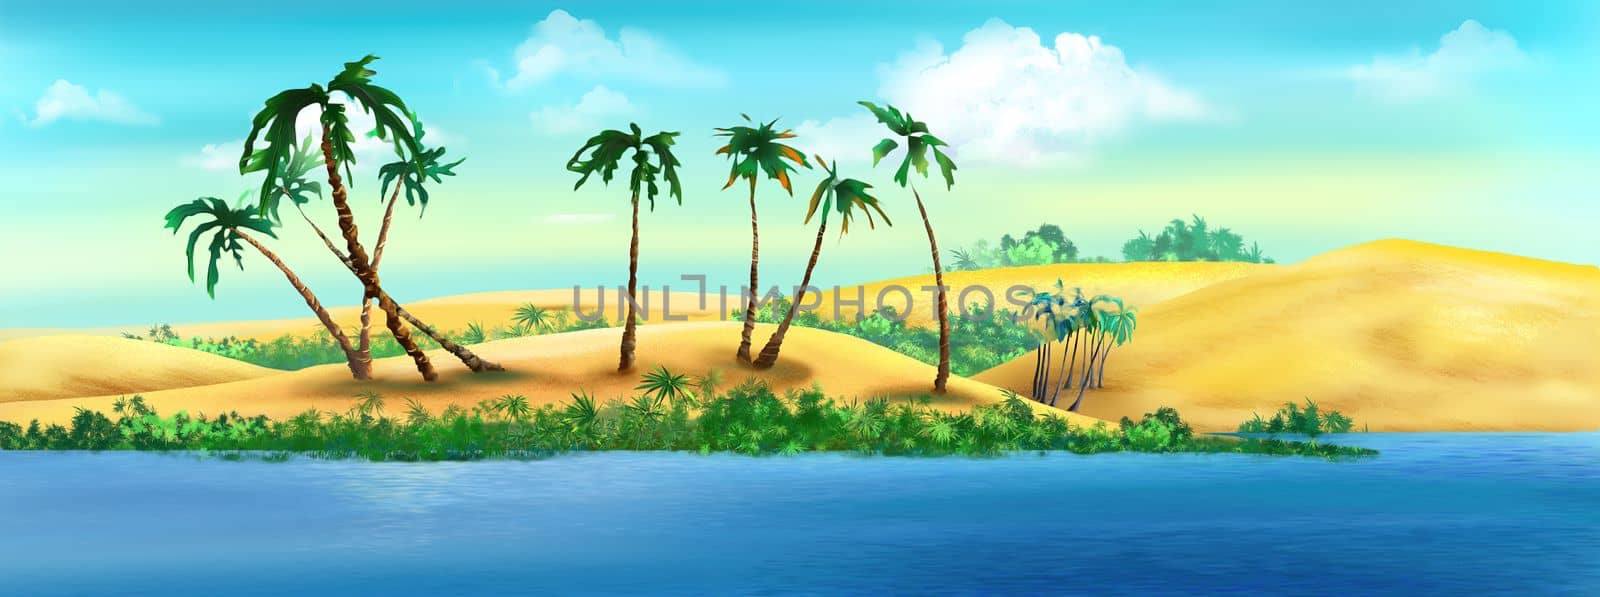 Palm trees on a river bank illustration by Multipedia